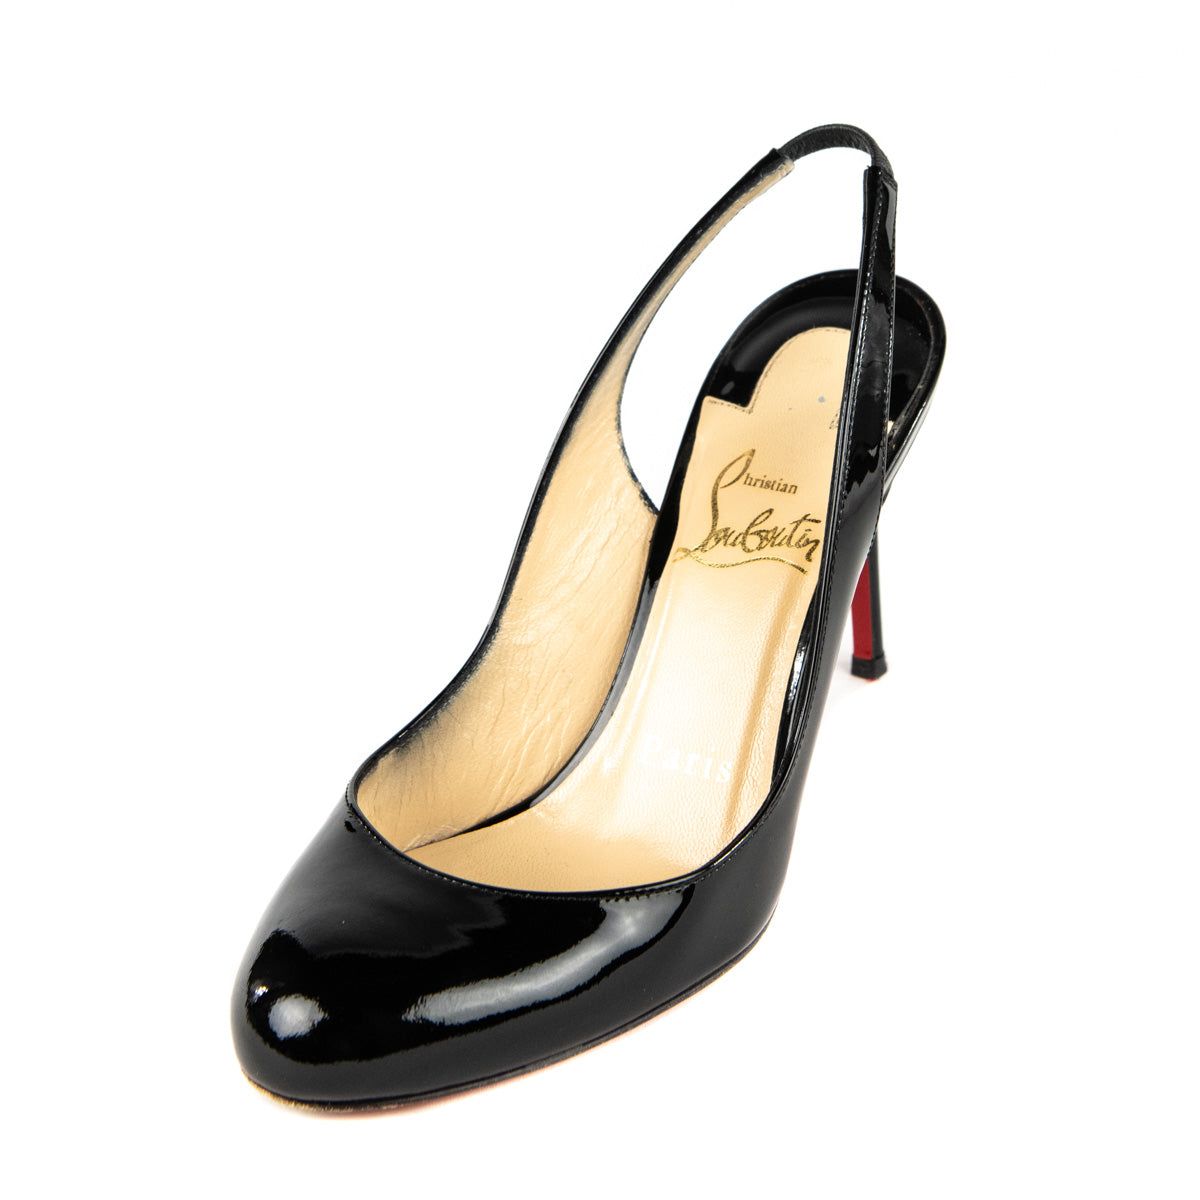 Christian Louboutin - Authenticated Boots - Patent Leather Black for Women, Never Worn